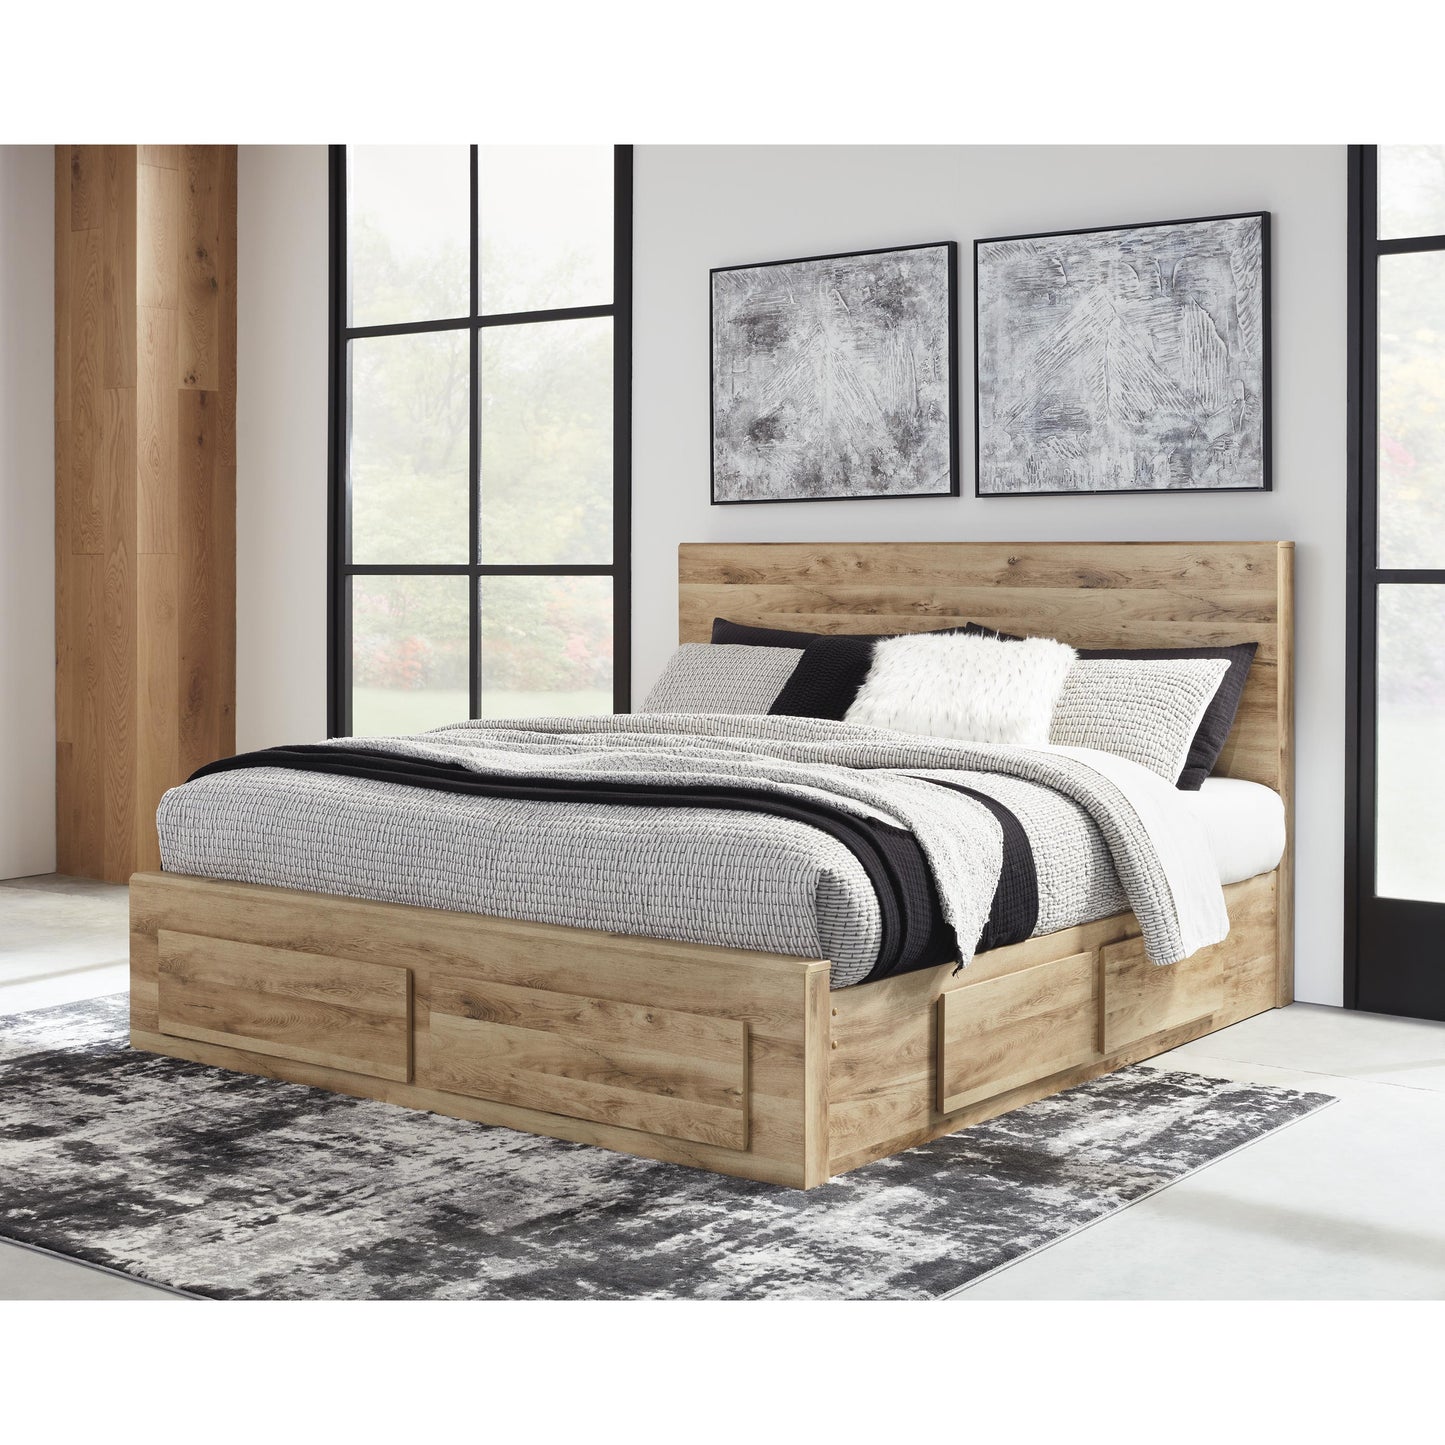 Signature Design by Ashley Hyanna King Panel Bed with Storage B1050-58/B1050-56S/B1050-60/B1050-60/B100-14 IMAGE 5